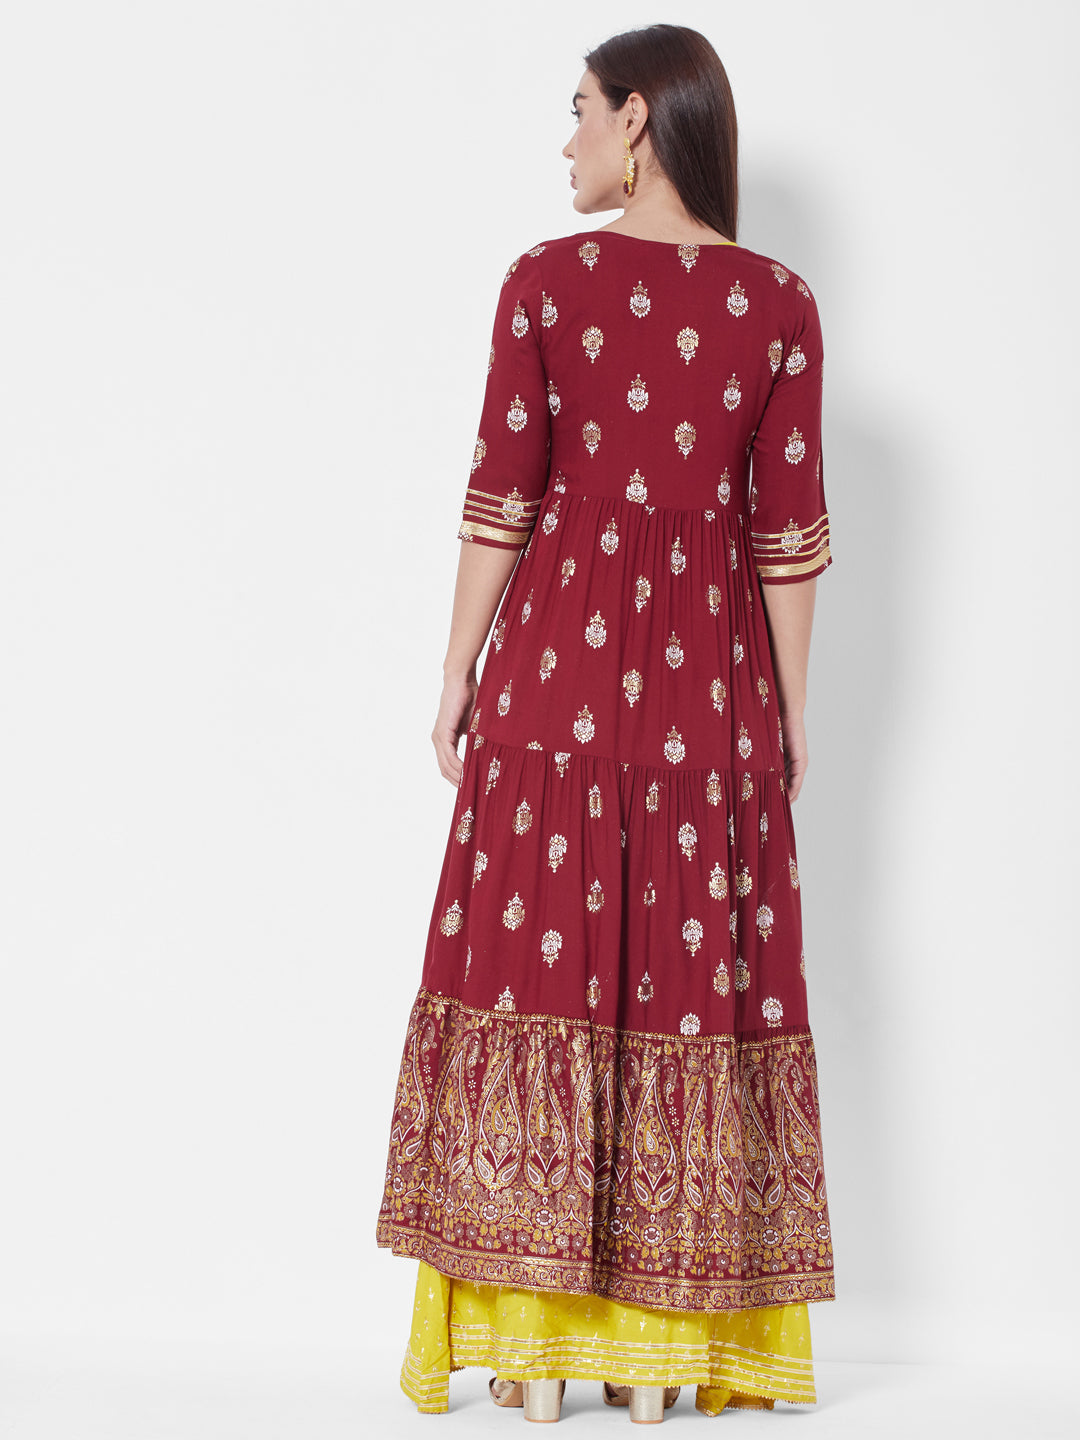 Vedic Ethnic Motifs Printed Embroidery Maxi Ethnic Dress With Jacket